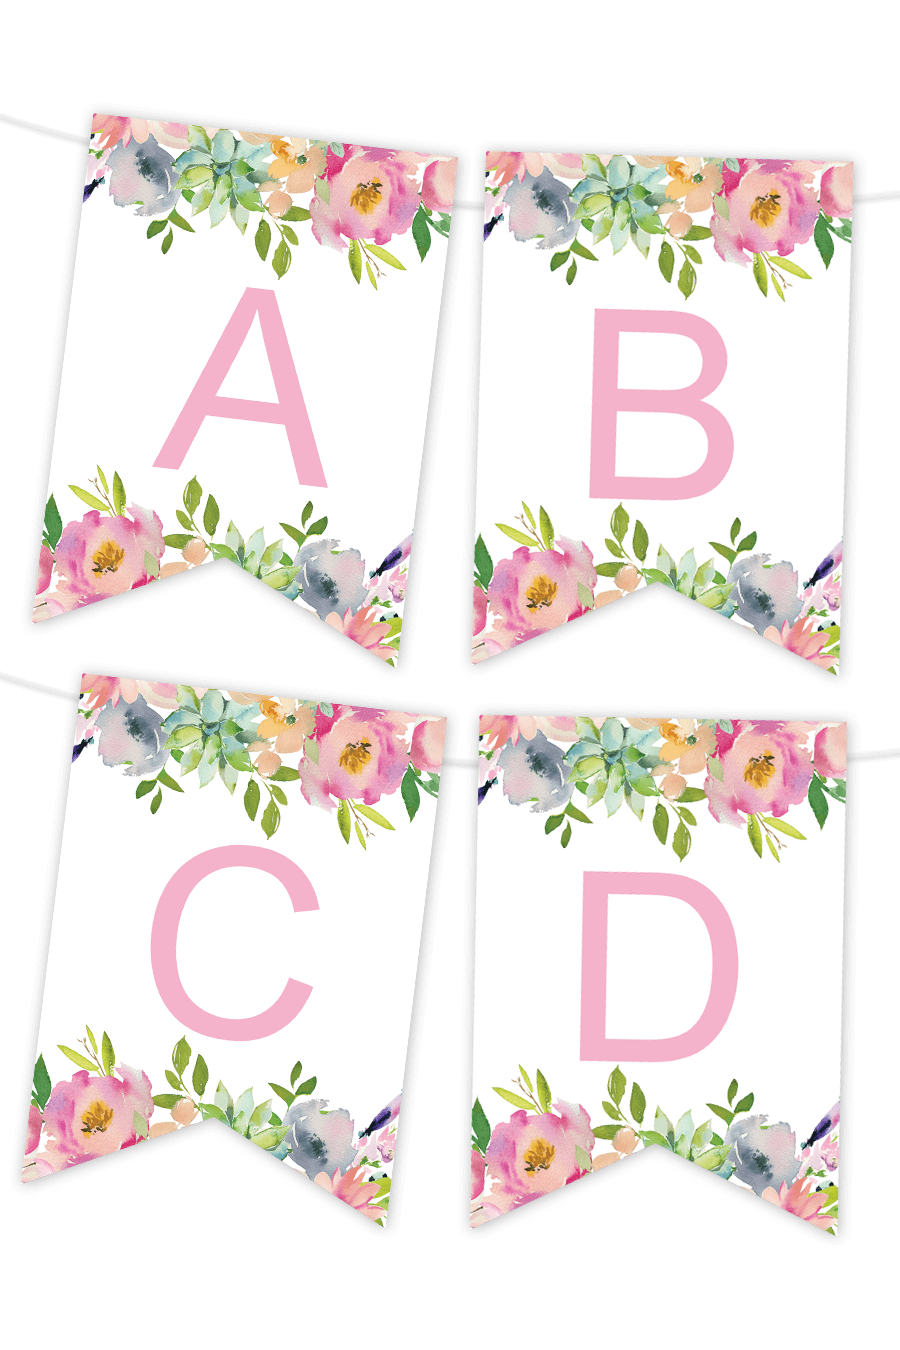 Printable Banners - Make Your Own Banners With Our Printable Templates - Free Printable Banner Maker